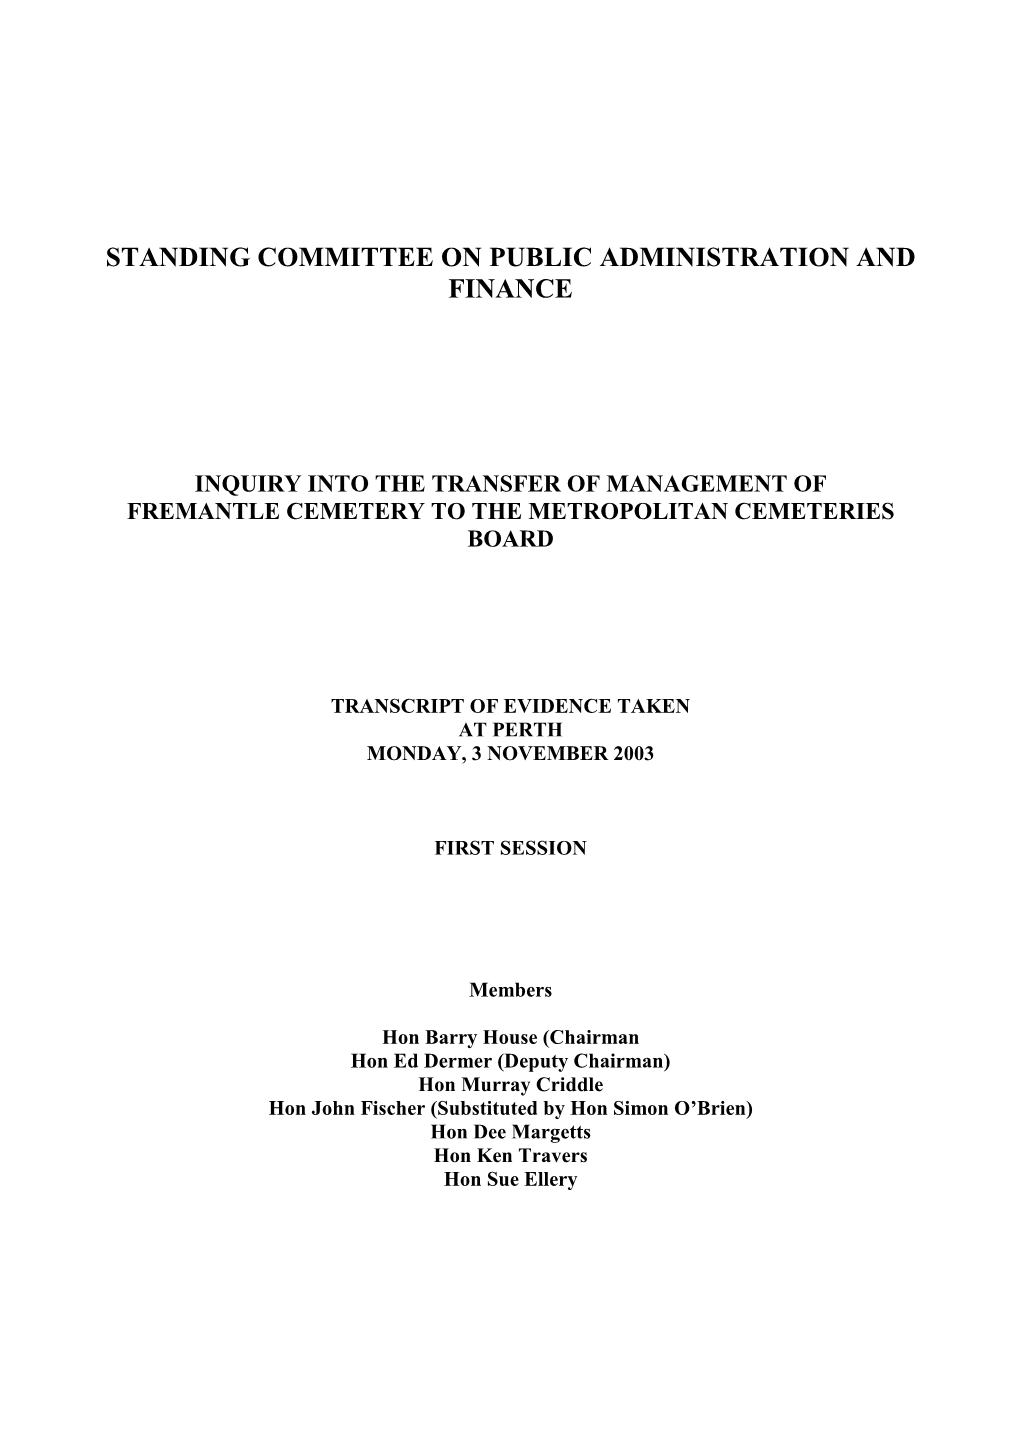 Standing Committee on Public Administration and Finance